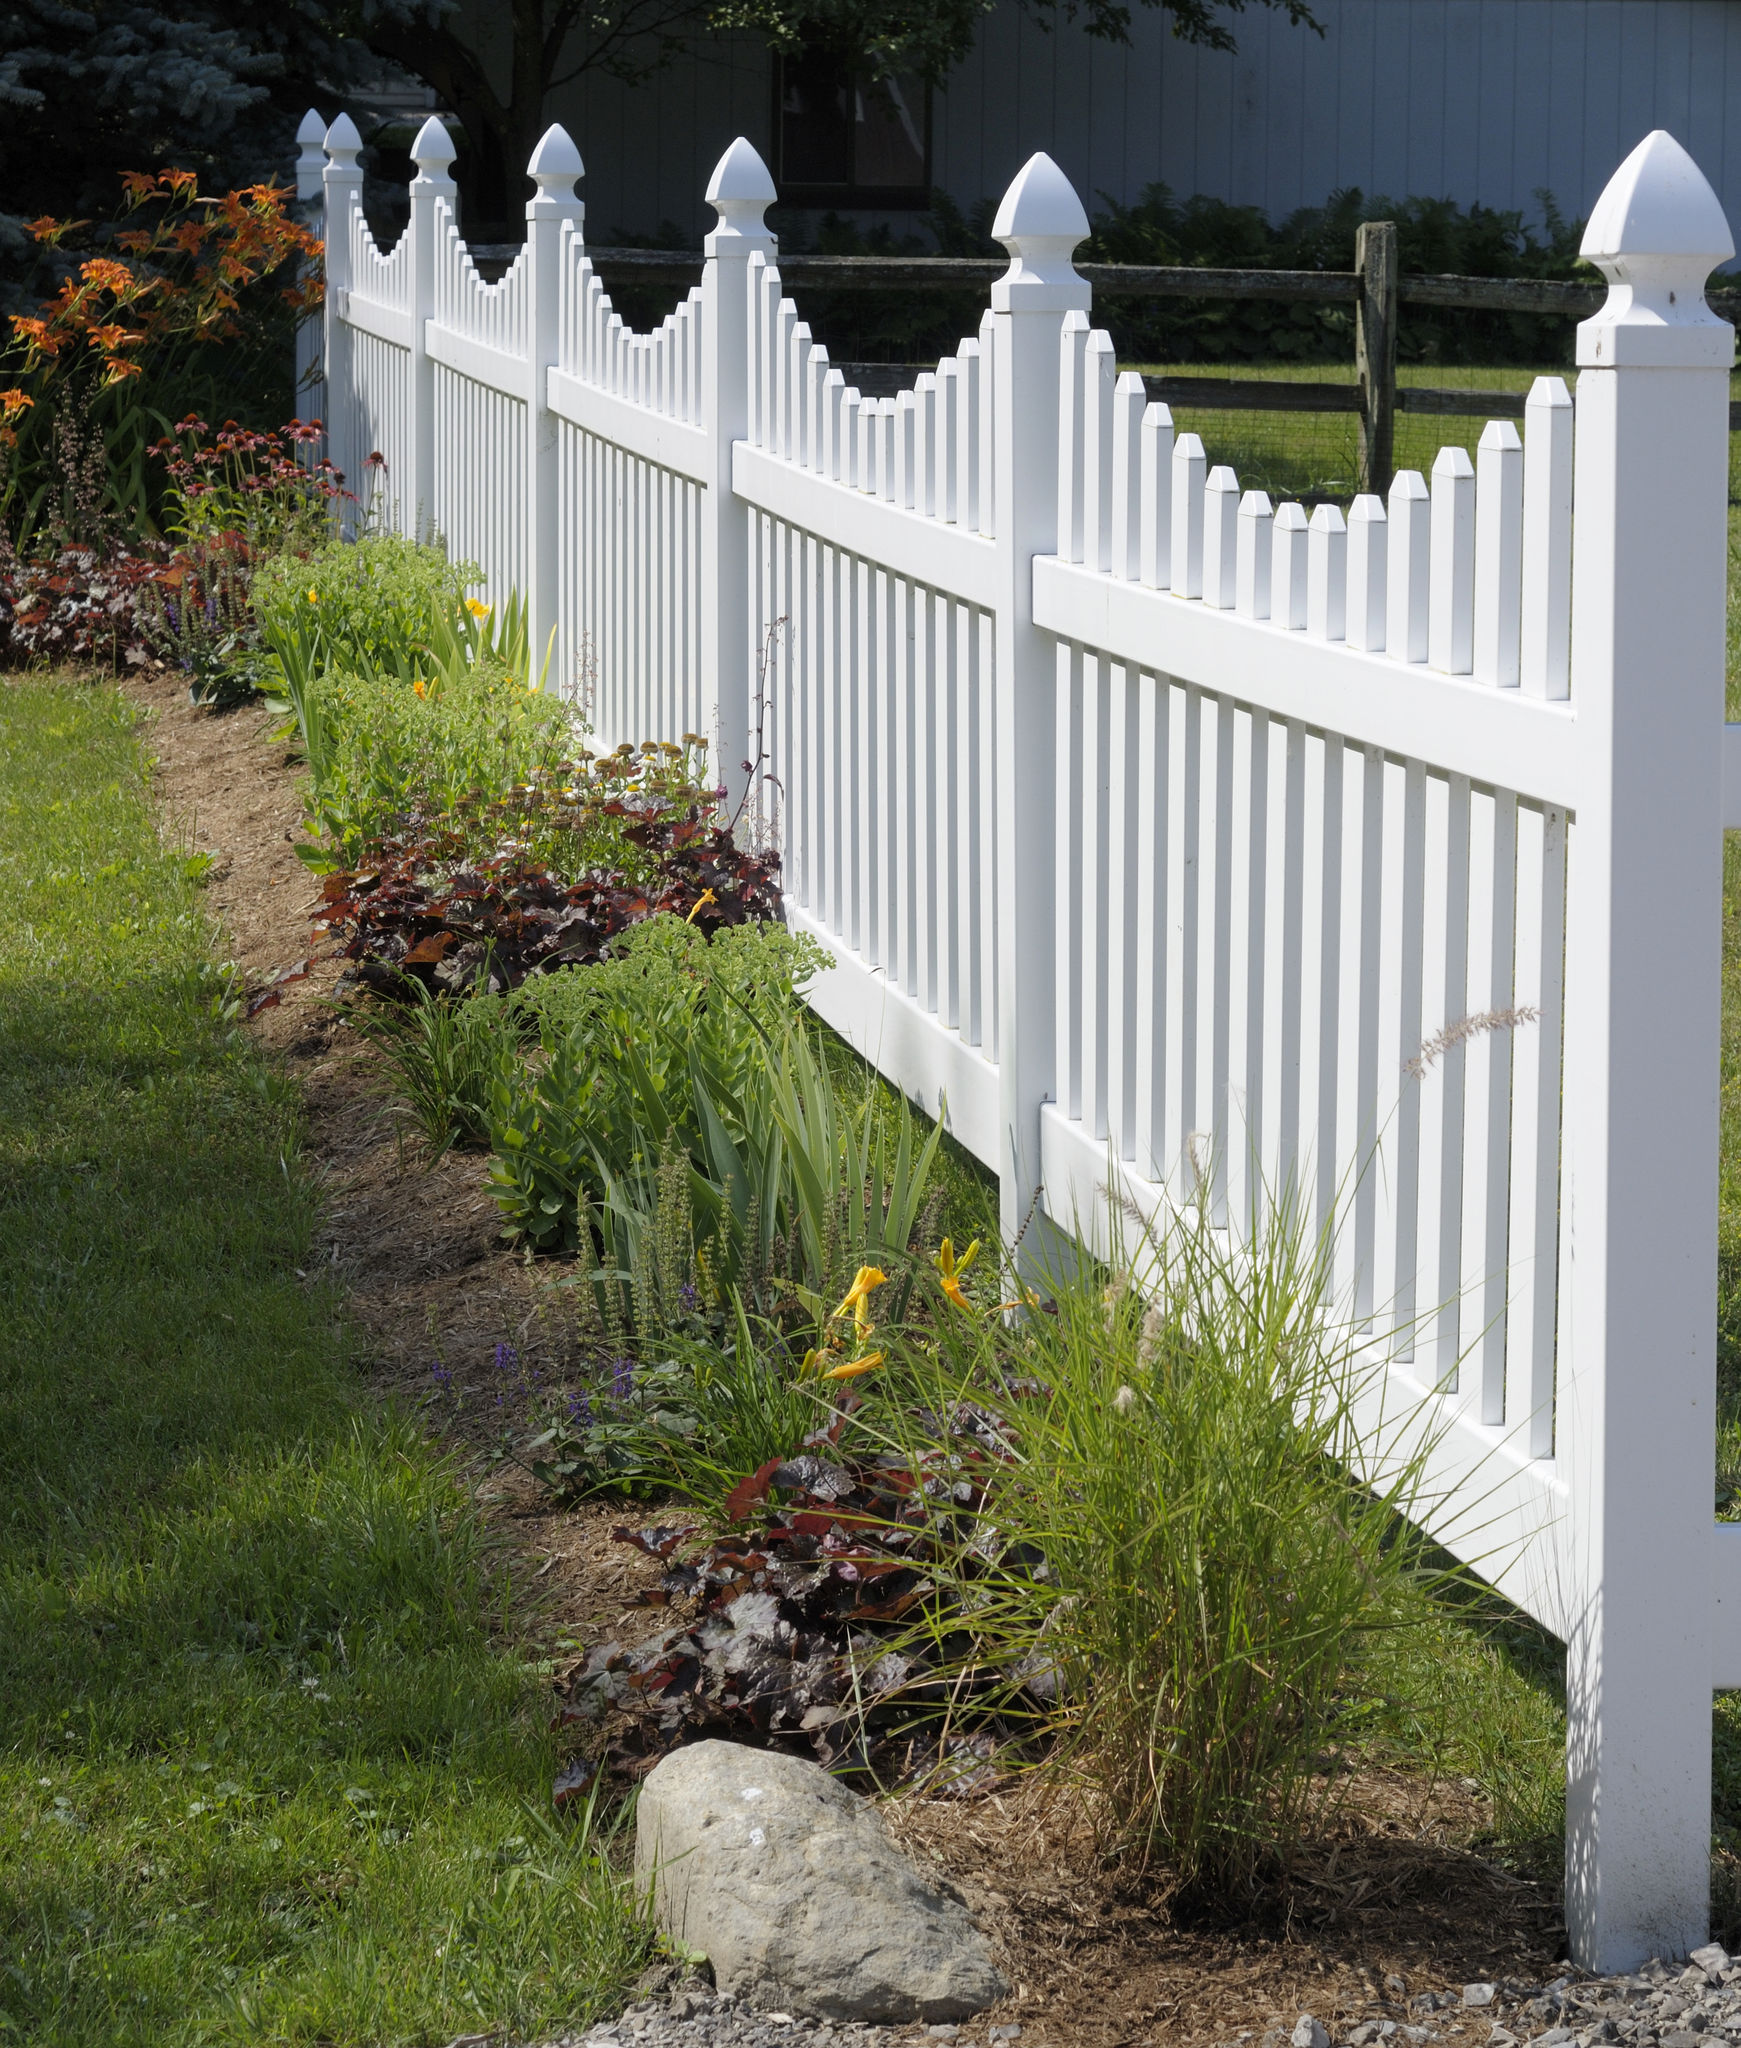 Trusted Vinyl Fence Company in Raleigh, NC | AAA Fence & Decks